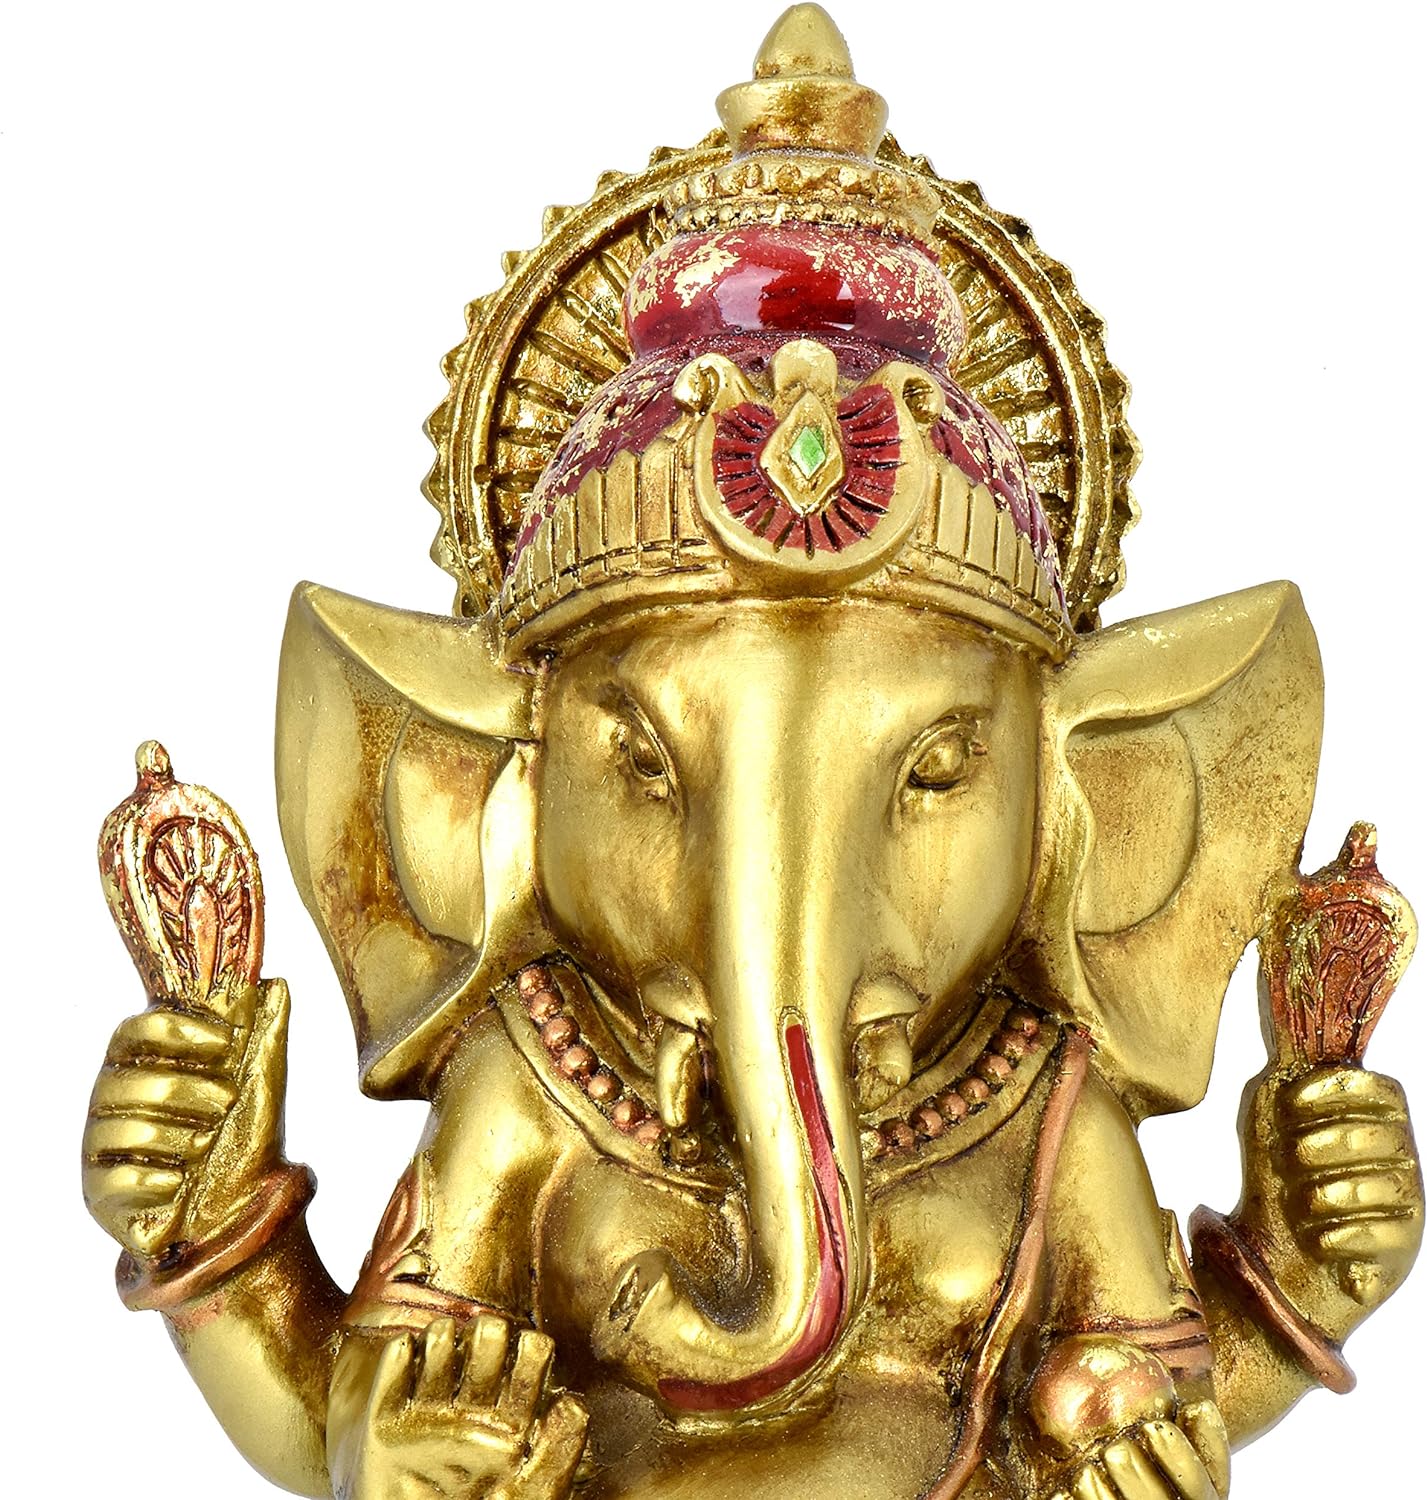 Ganesha Statue Elephant Hindu God of Success Large 9.5-inch-tall Resin Ganesh Idol Hand-Painted in Gold Indian Decor India Gift for Wedding and Diwali Decoration